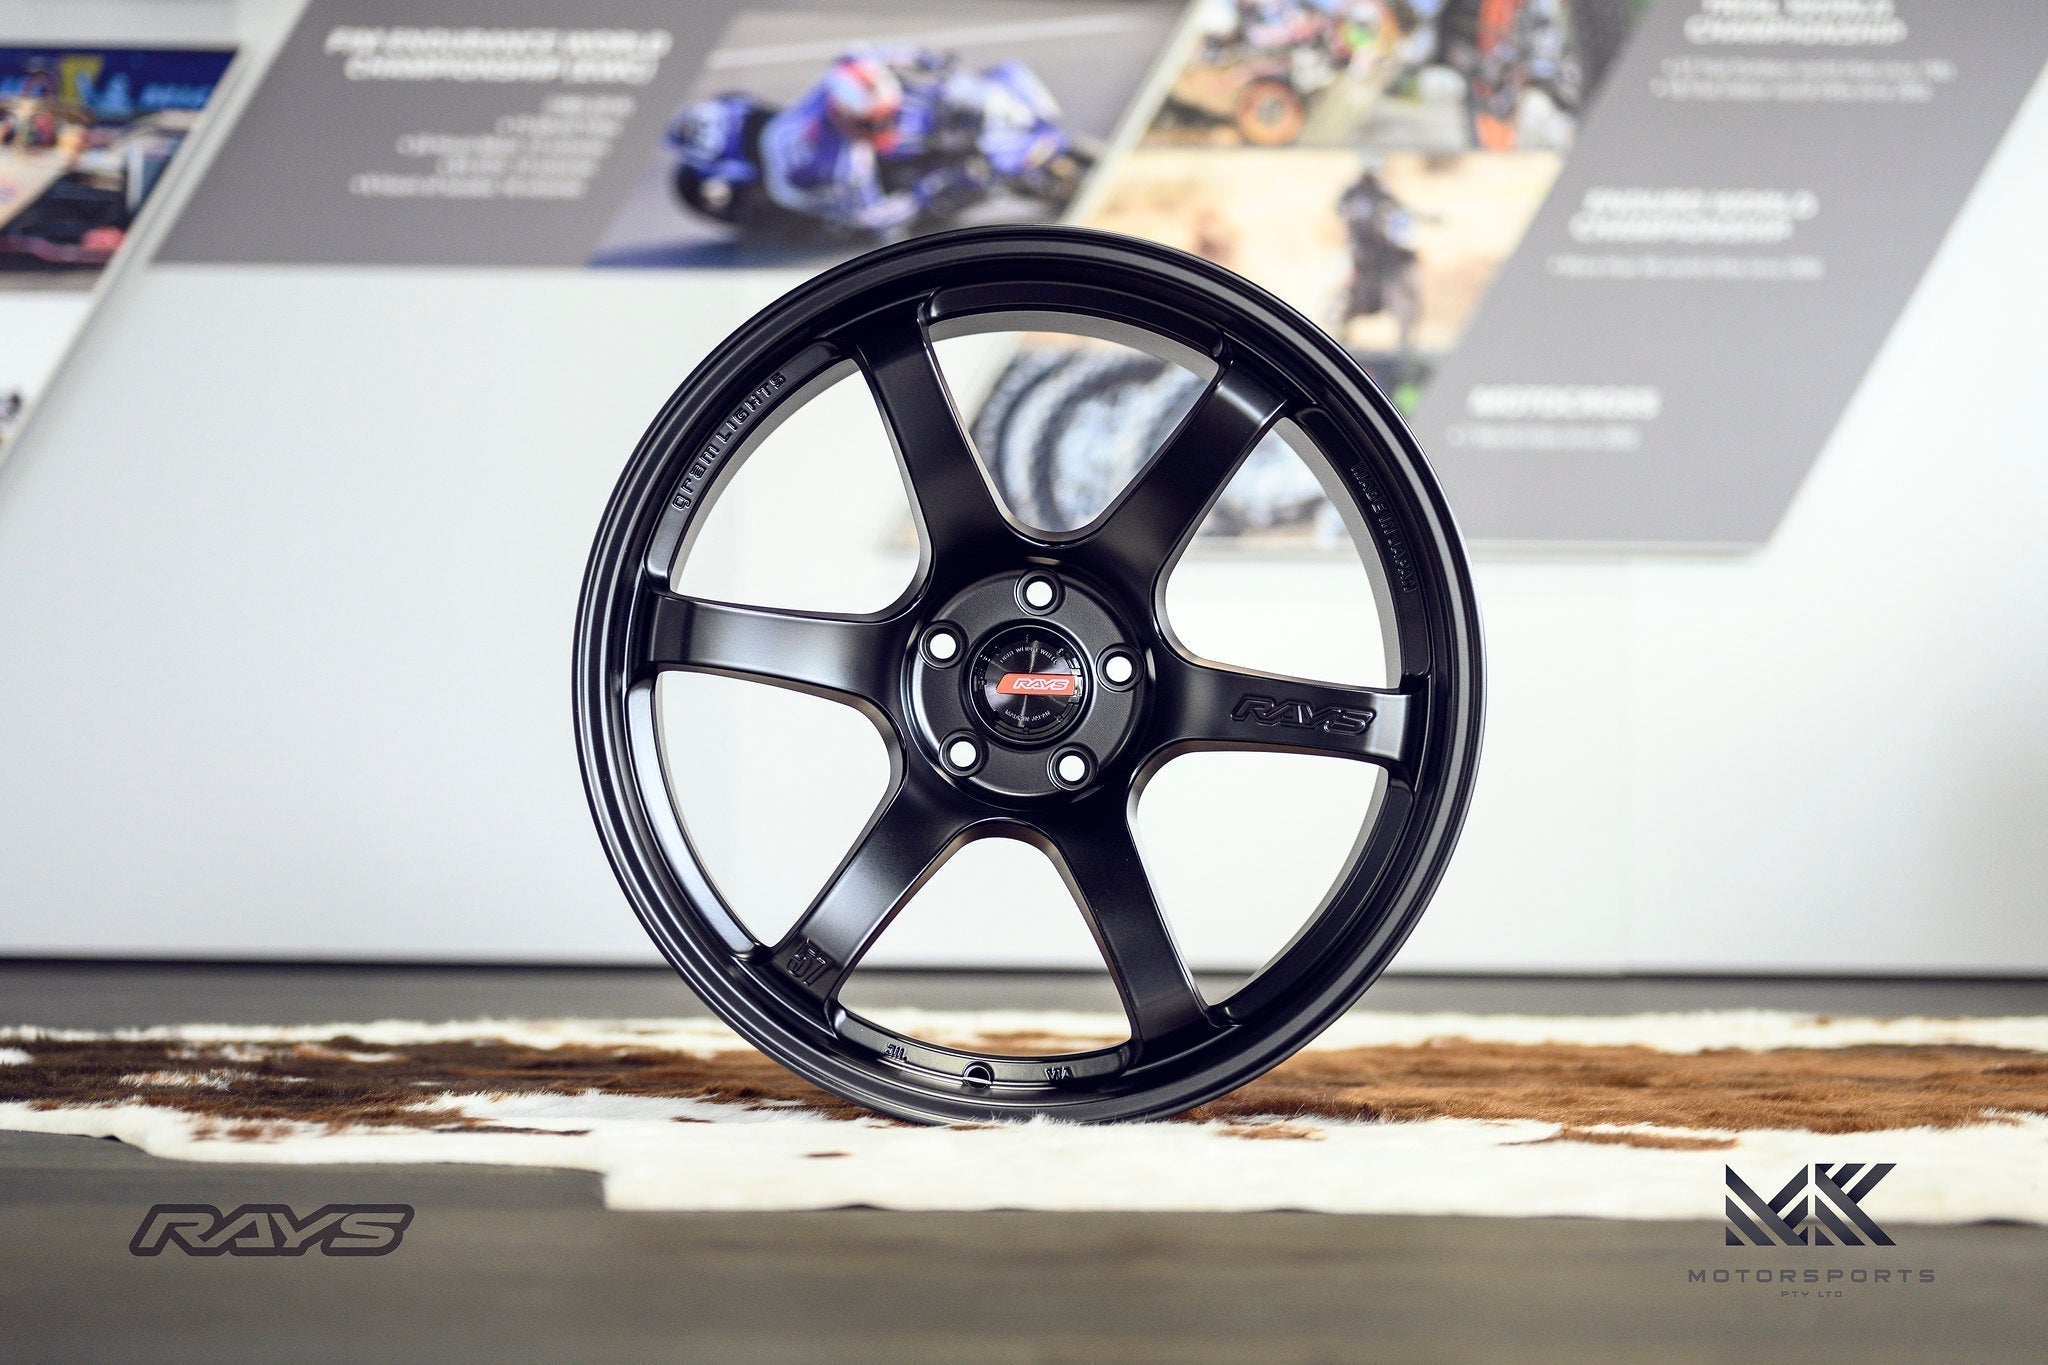 gramLIGHTS 57DR 18" - Premium Wheels from Gram Lights - From just $2190.0! Shop now at MK MOTORSPORTS